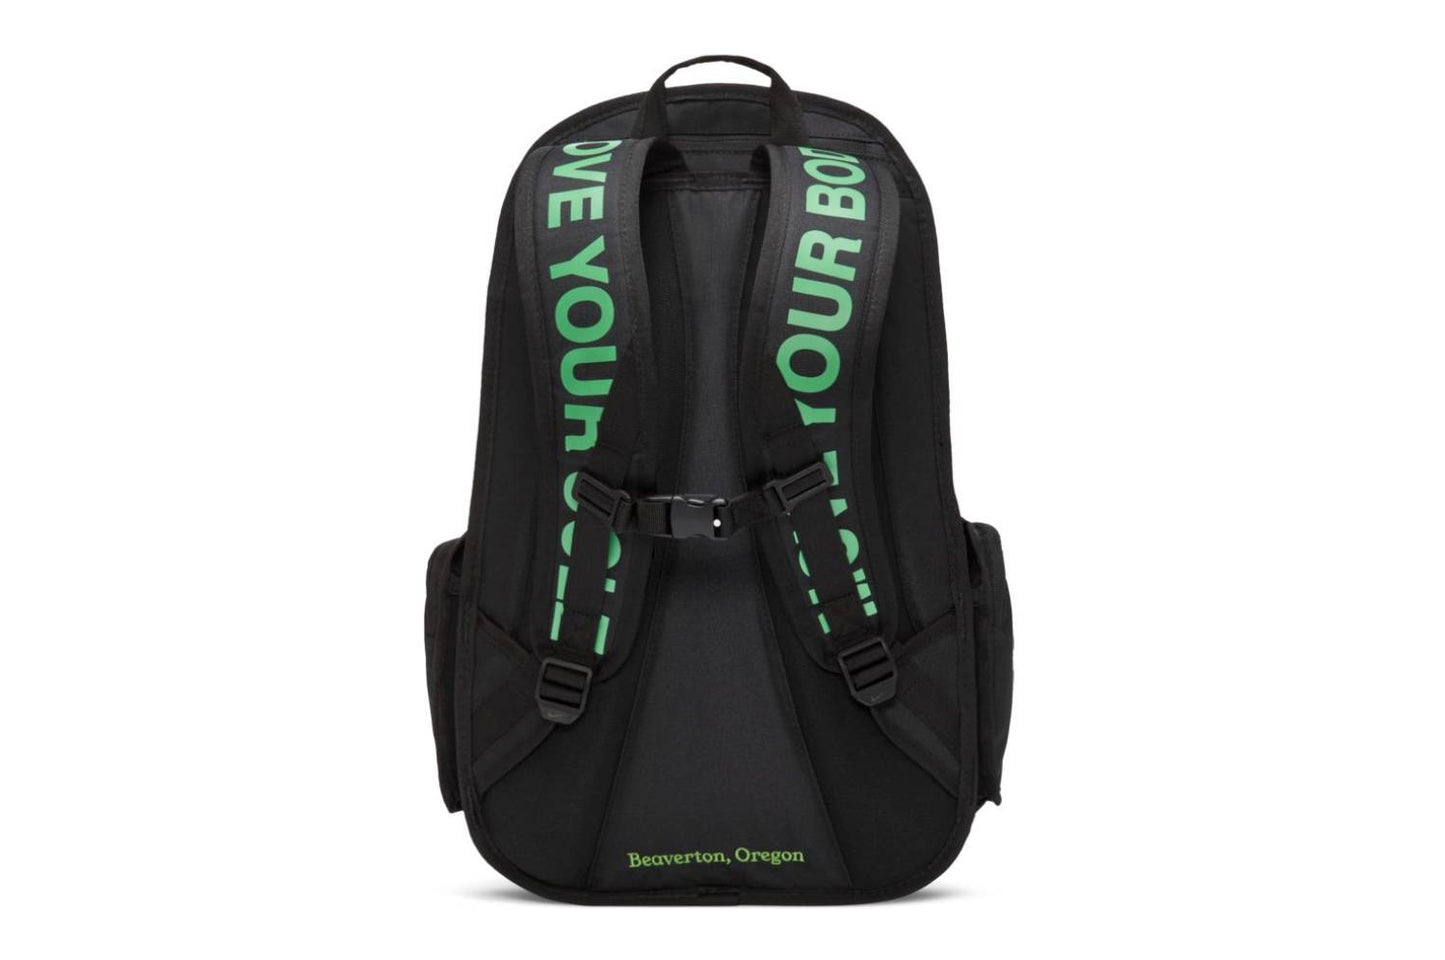 Worldtour RPM Backpack